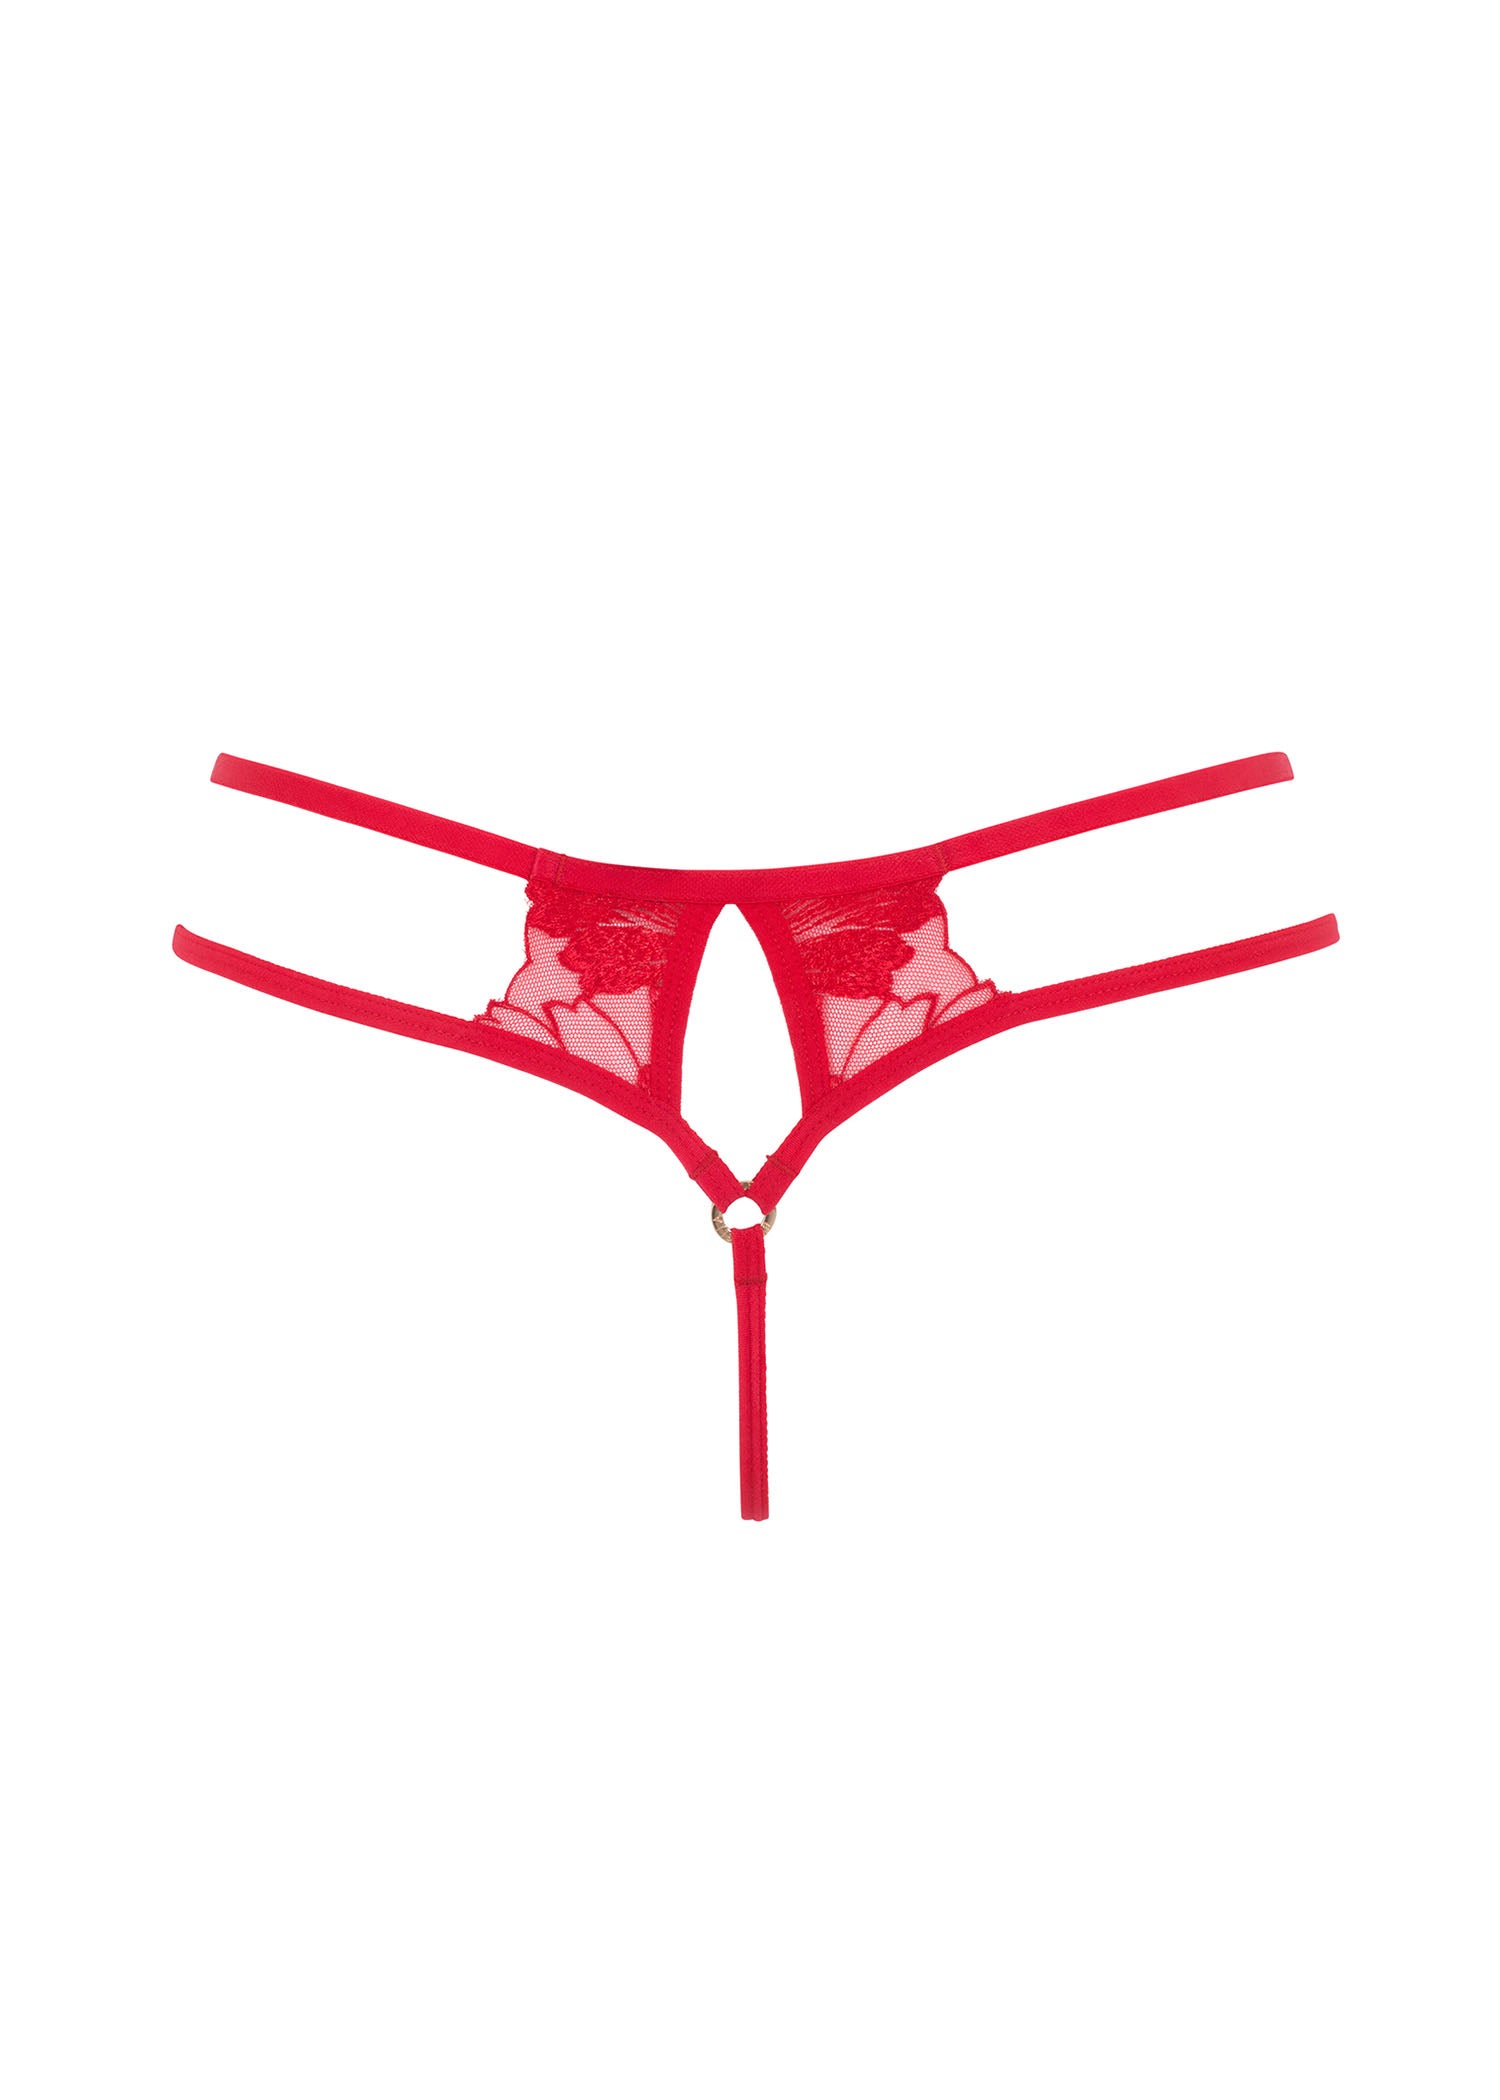 Bluebella Colette Thong (Tomato Red) - Embroidery Lace Underwear | Avec Amour Sexy Lingerie